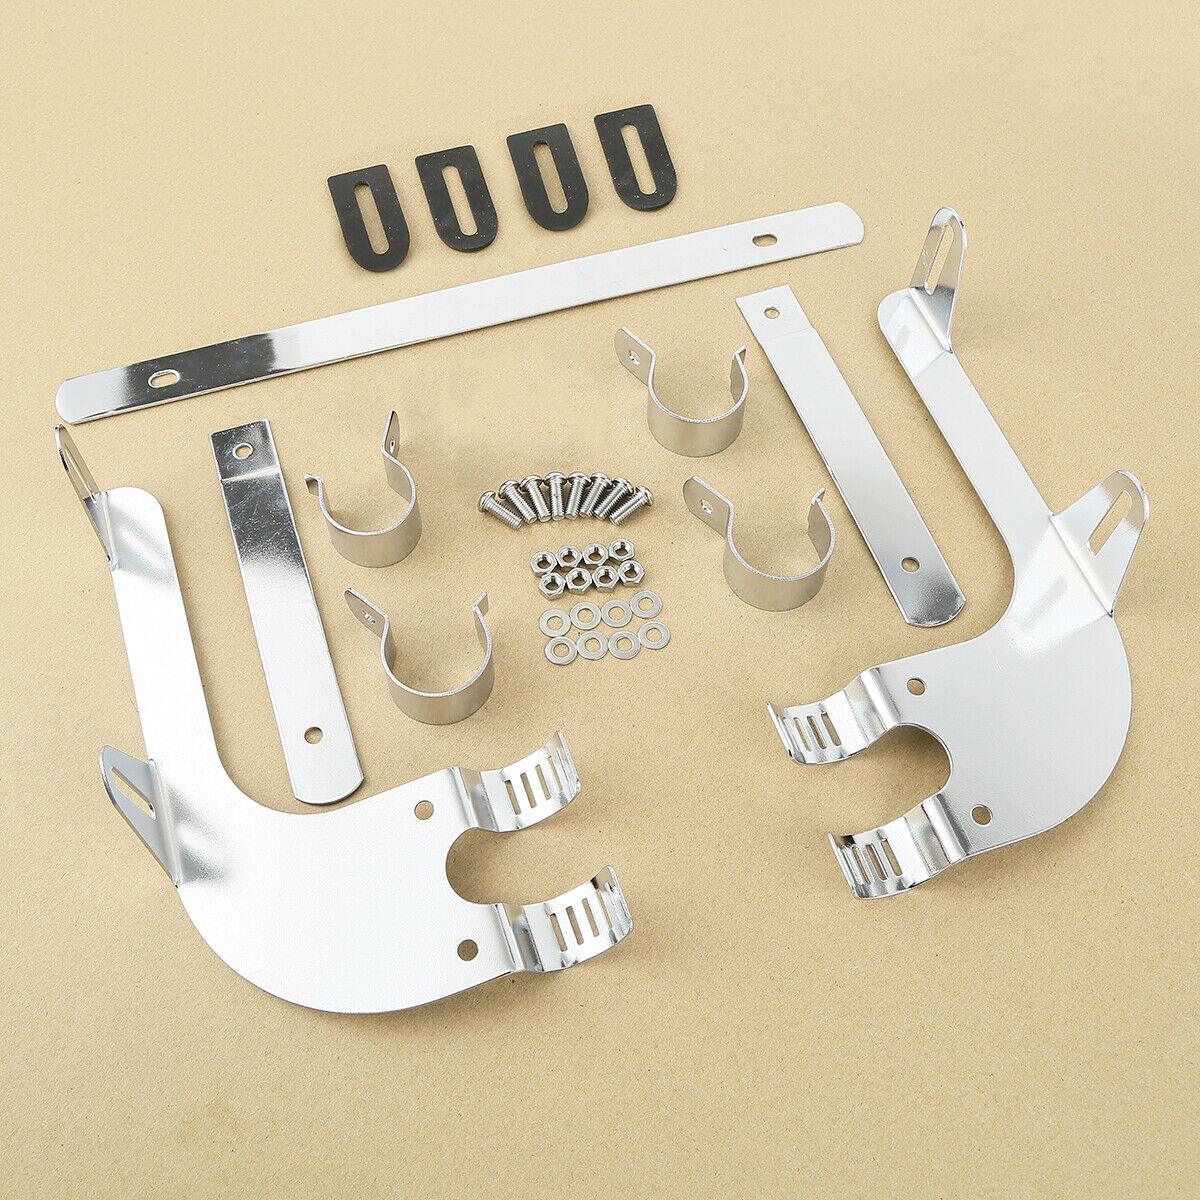 39mm Windshield Screen Bracket Fit For Harley Dyna Super Wide Glide Sportster XL - Moto Life Products